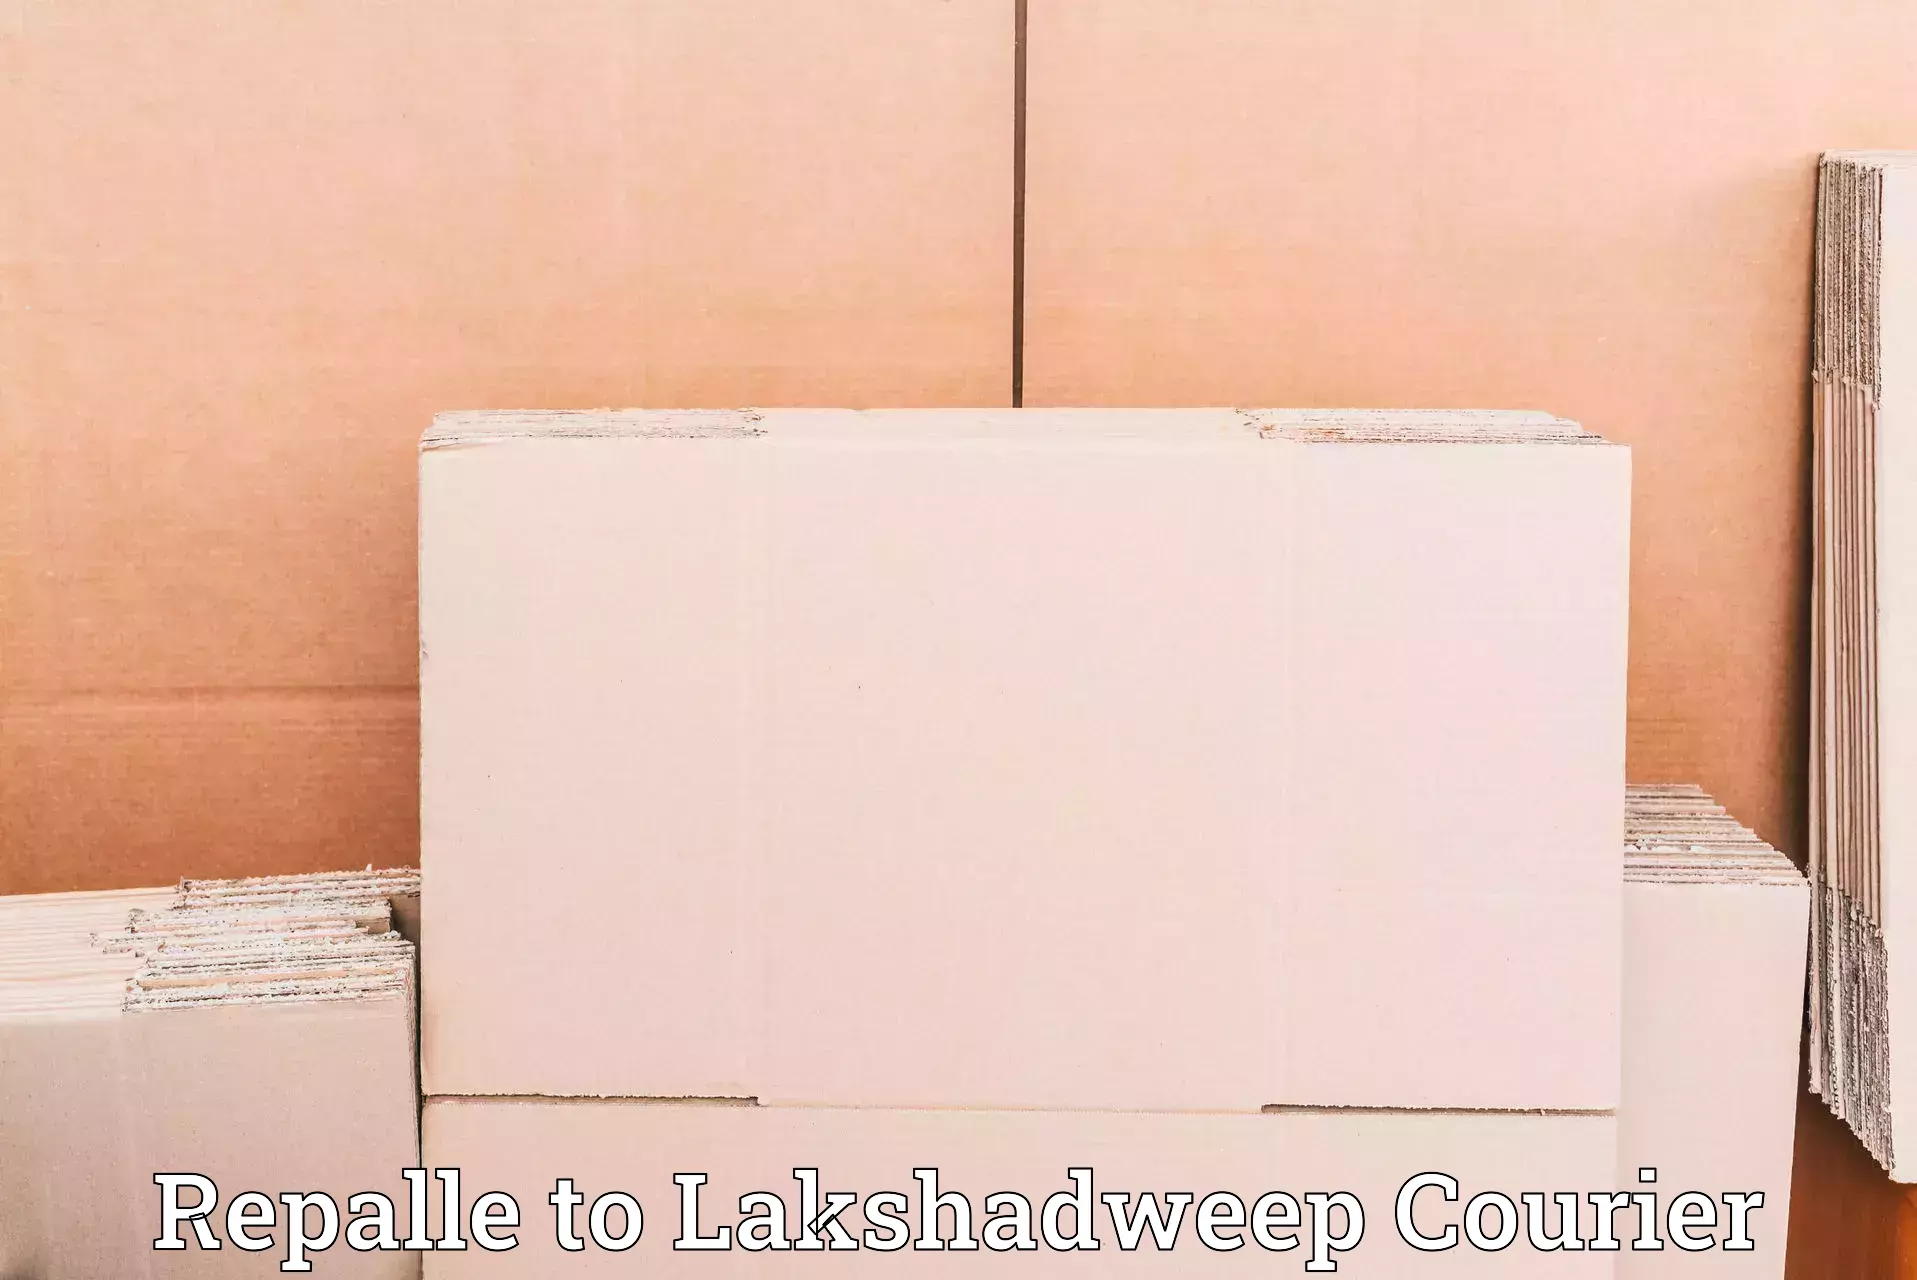 Tailored delivery services Repalle to Lakshadweep